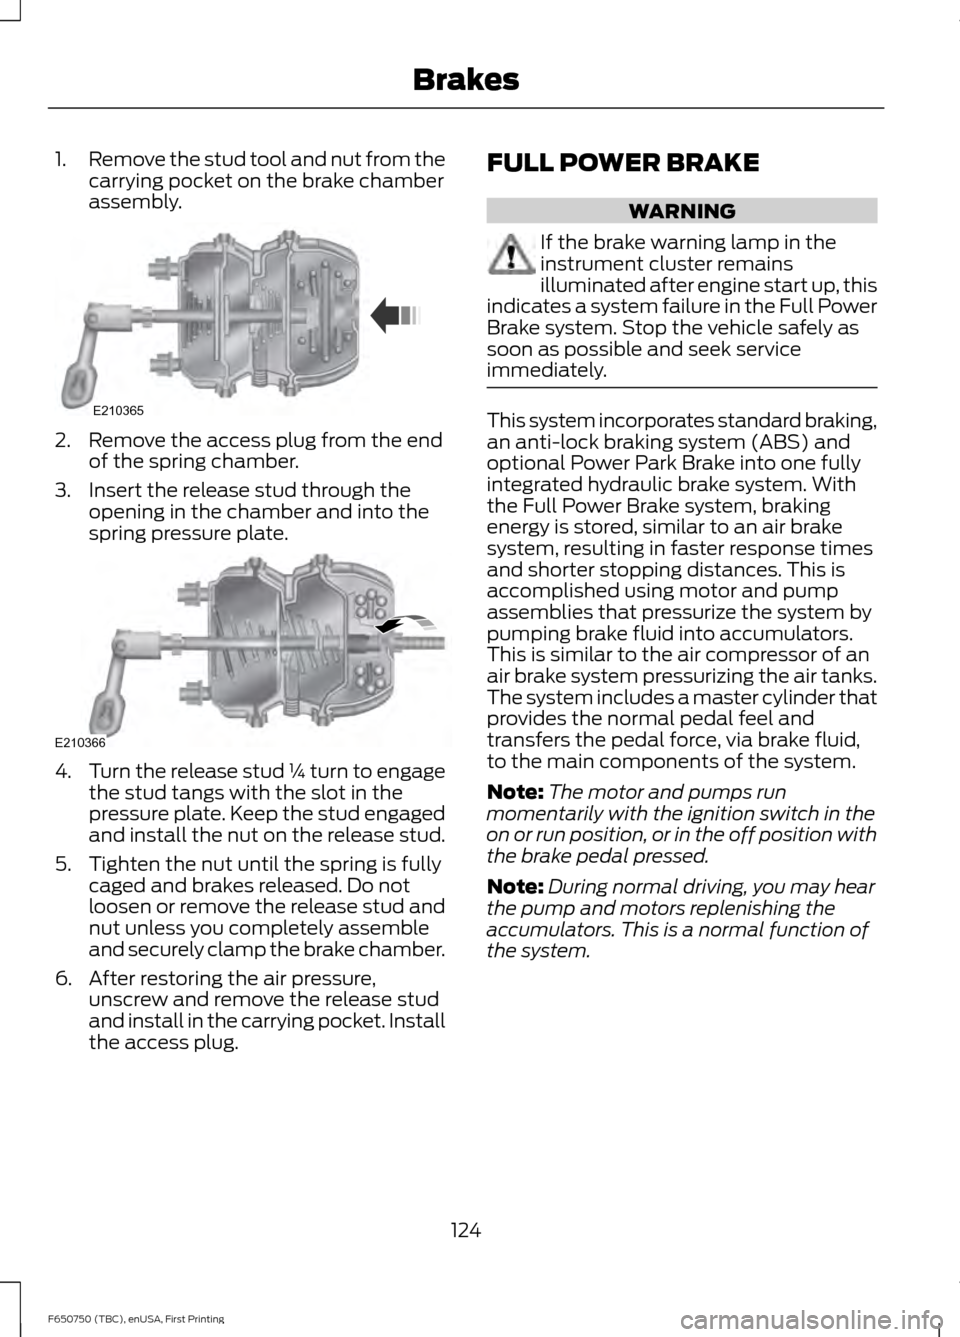 FORD F650 2016 13.G Owners Manual 1.
Remove the stud tool and nut from the
carrying pocket on the brake chamber
assembly. 2. Remove the access plug from the end
of the spring chamber.
3. Insert the release stud through the opening in 